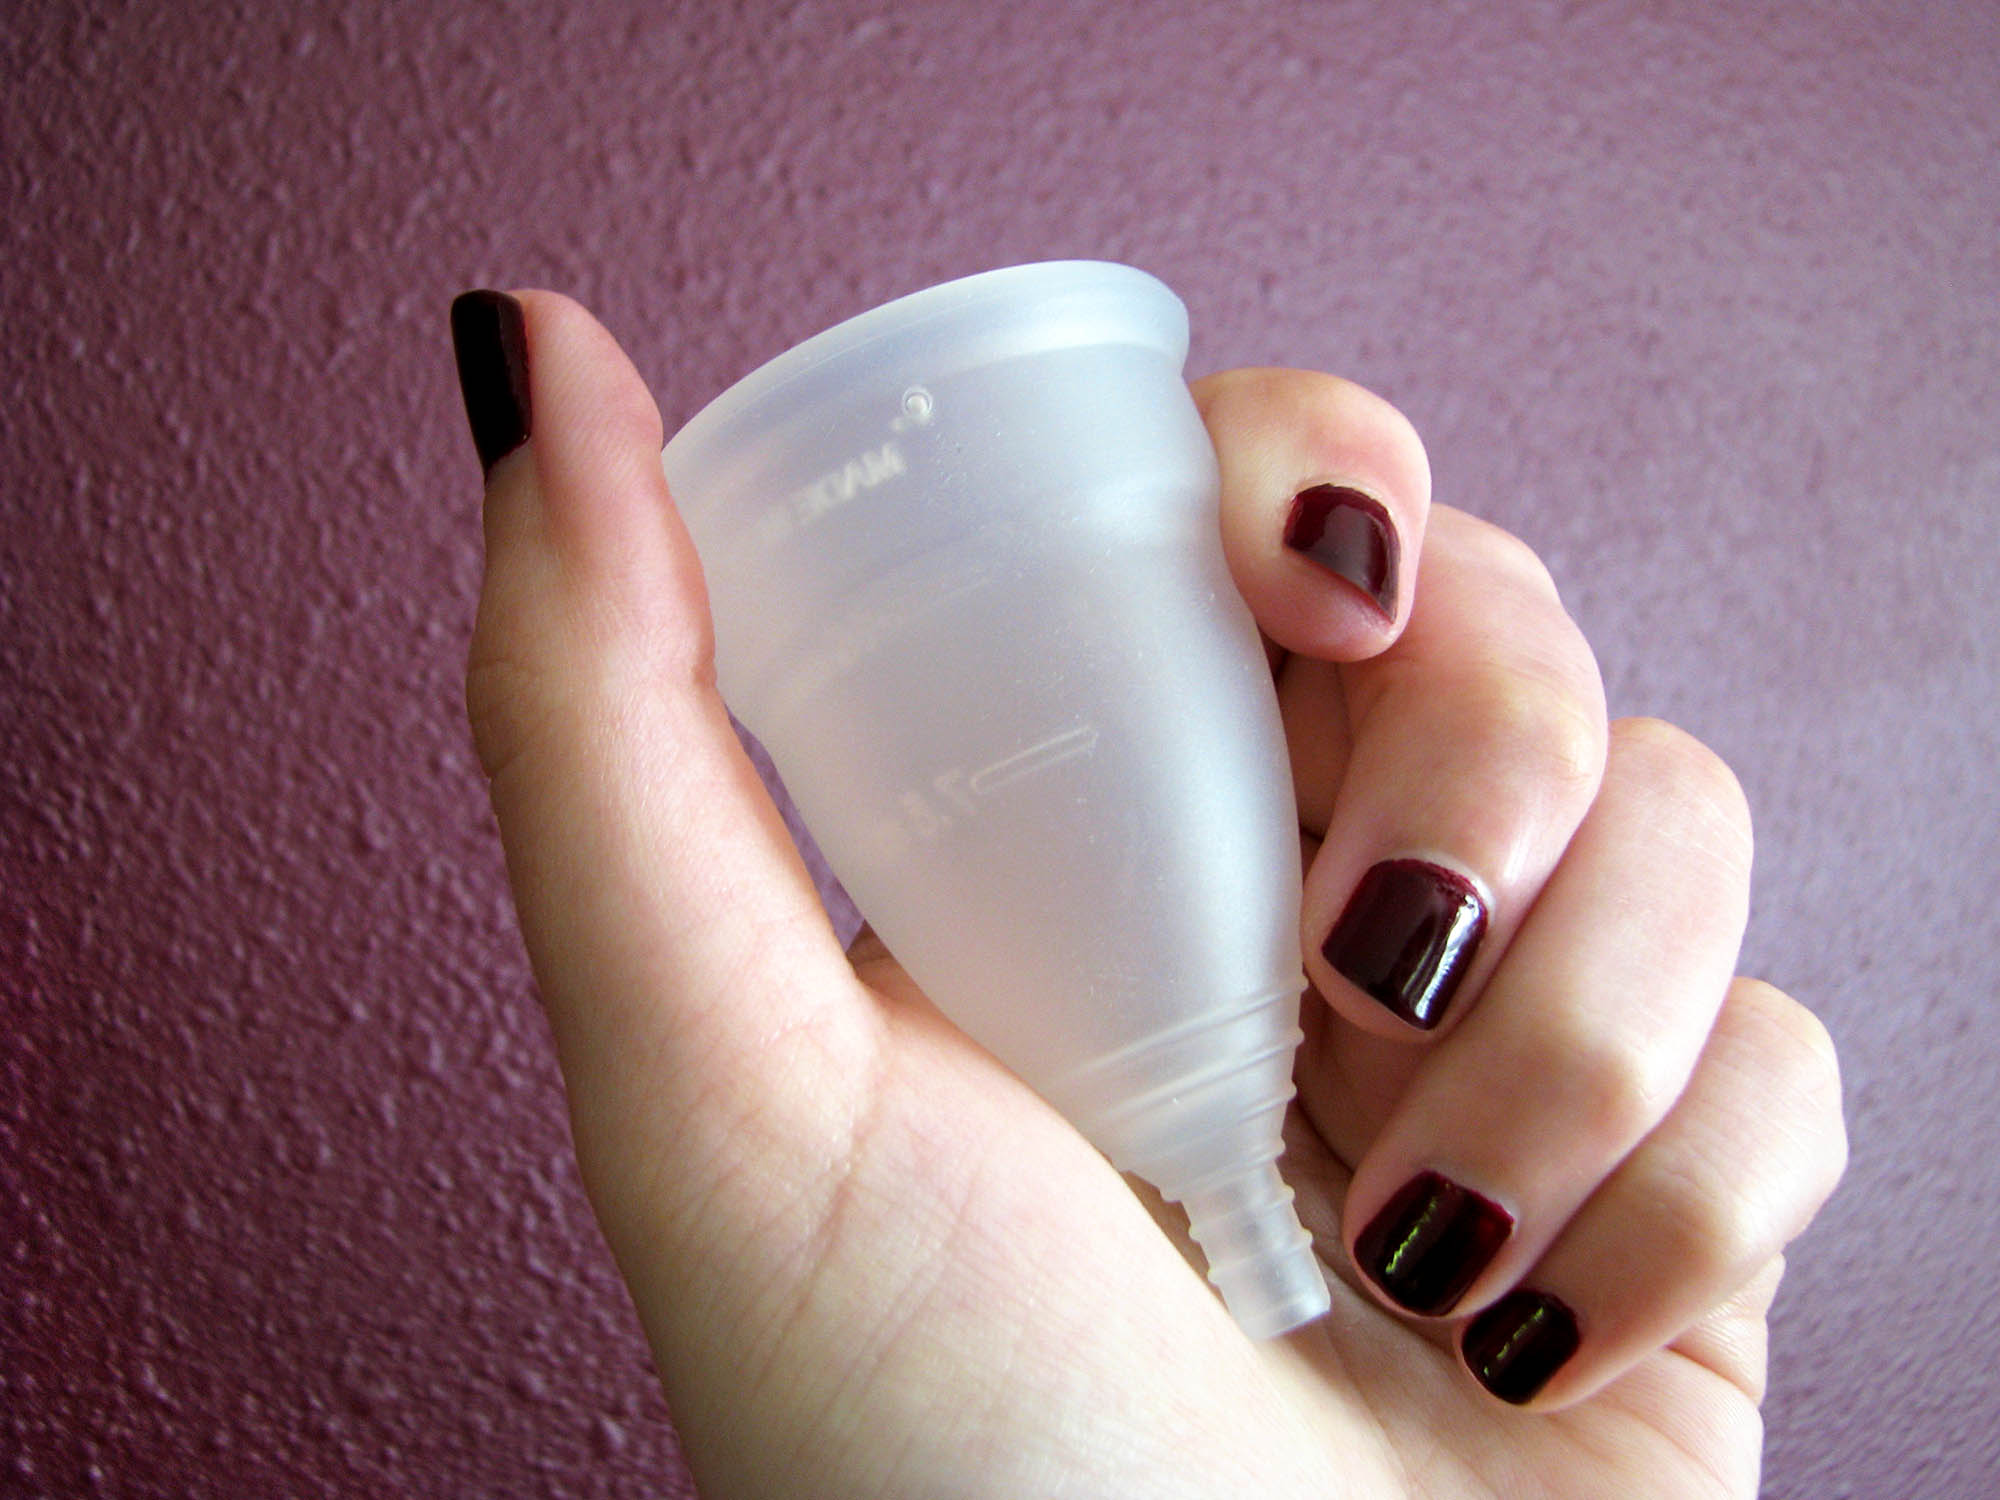 Me holding the Diva Cup silicone menstrual cup, with appropriately blood-colored polish on my fingernails.